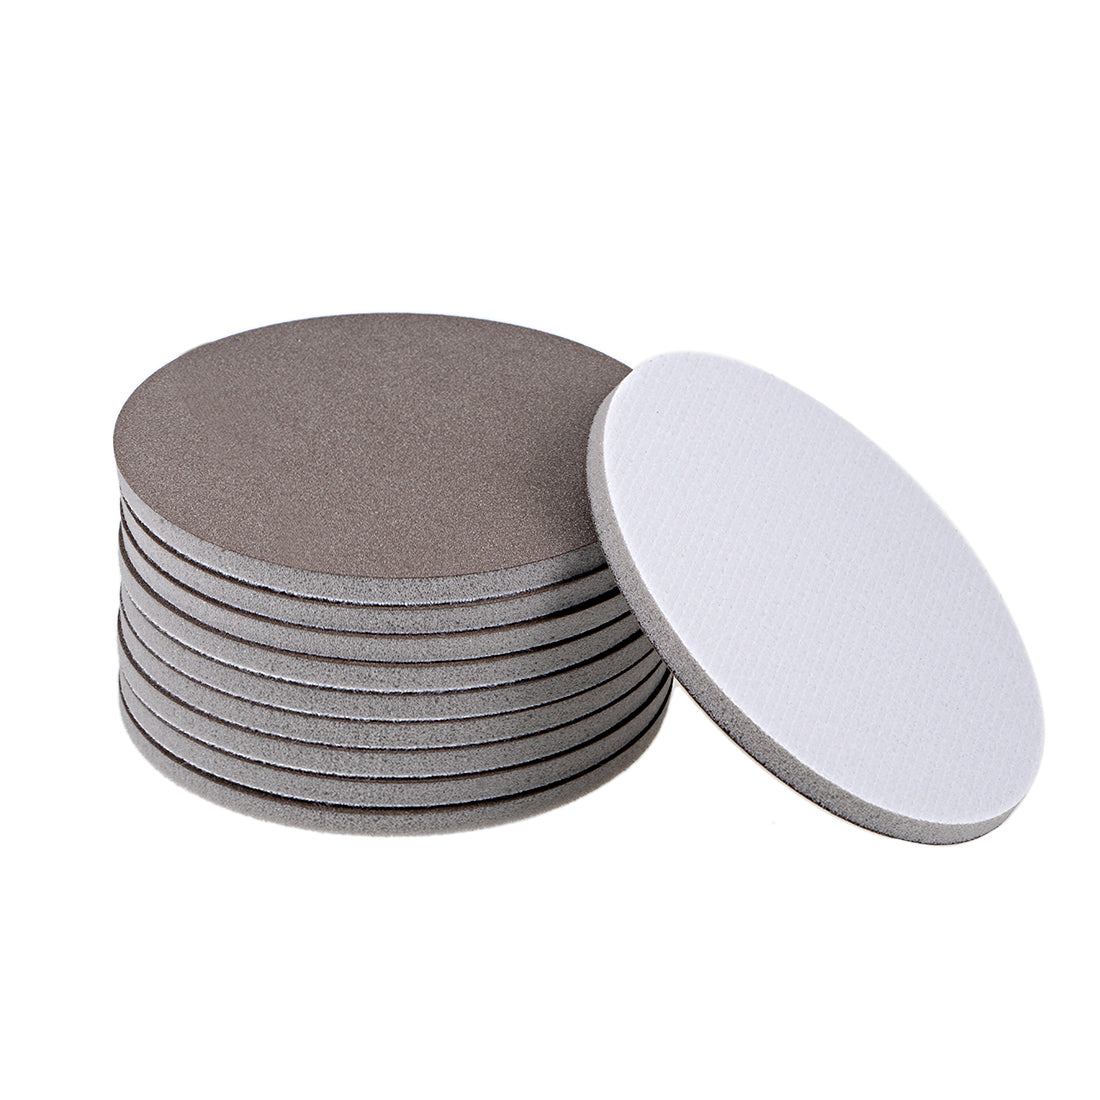 uxcell Uxcell 4-Inch 600-Grits Hook and Loop Sanding Disc, Sponge Sanding Pad Wet Dry Aluminum Oxide Sandpaper for Polishing & Grinding 10pcs